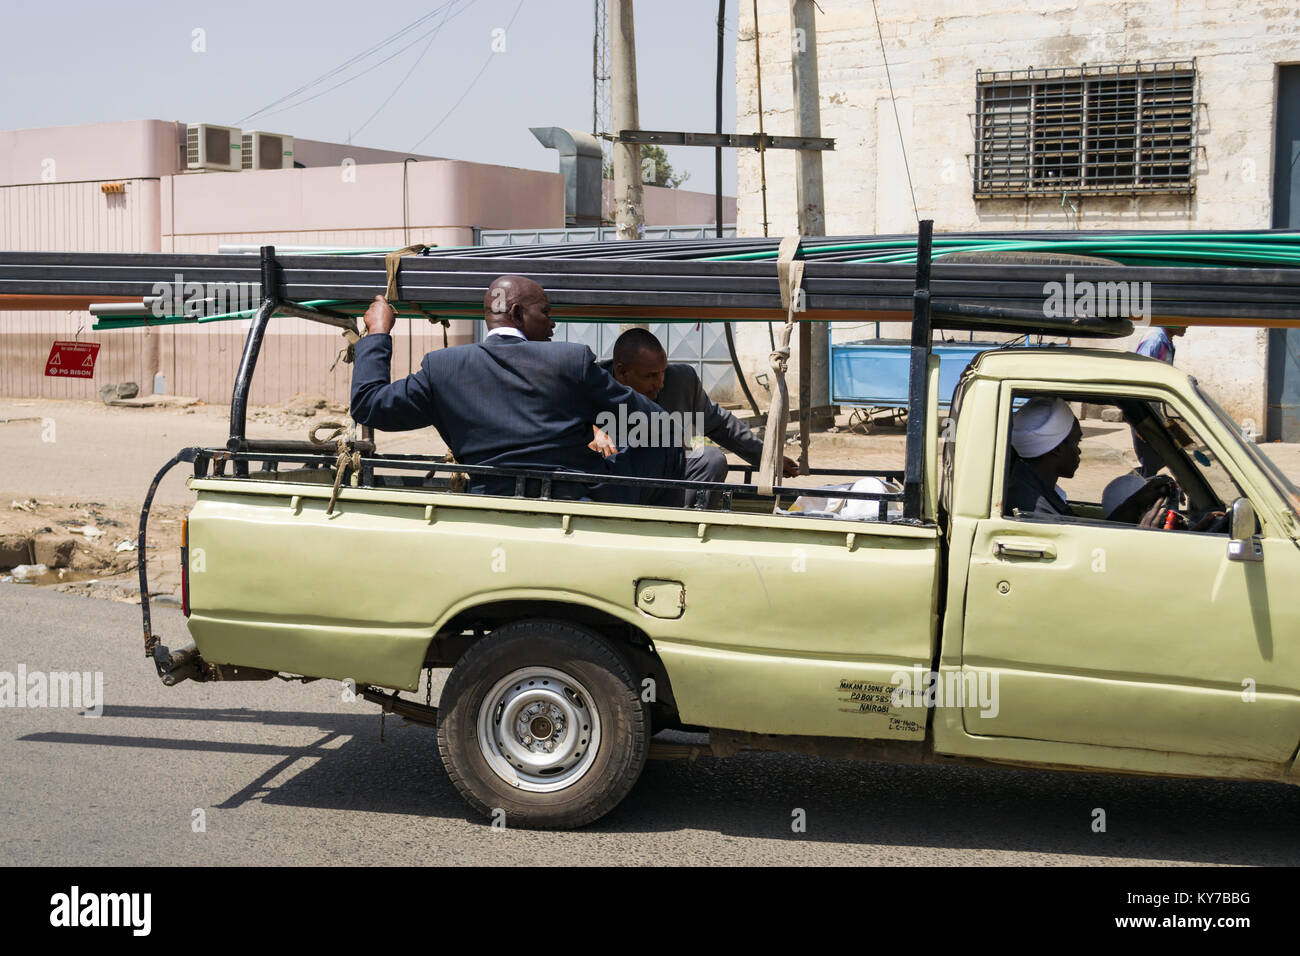 Two Kenyan men in suits sit in the back of a pickup truck as it transports steel framework on a road, Nairobi, Kenya, East Africa Stock Photo